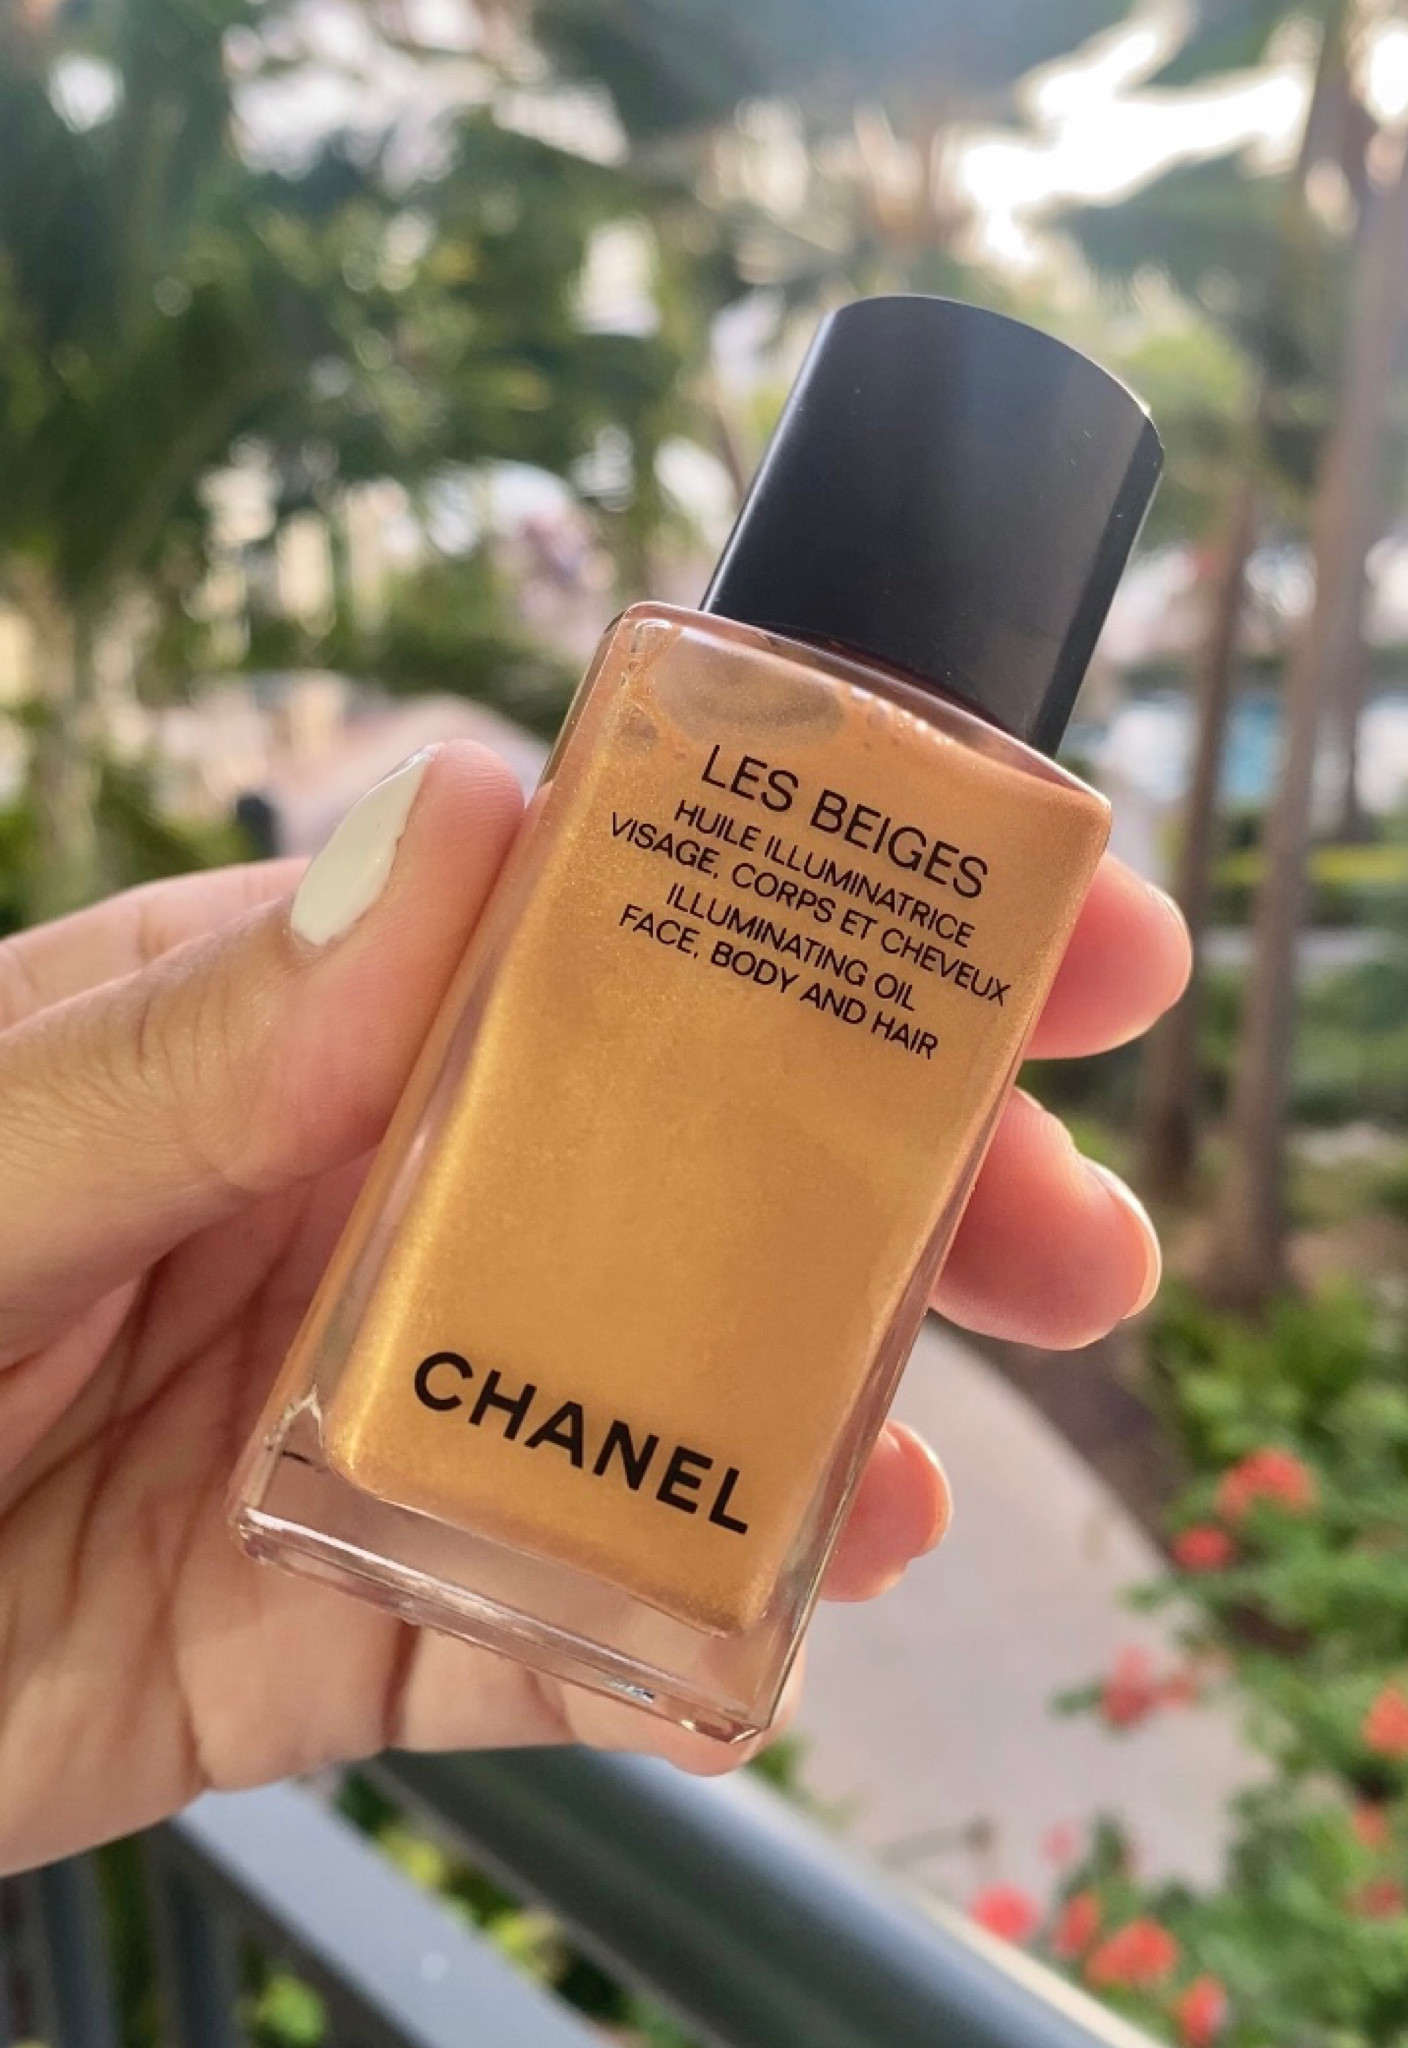 CHANEL (LES BEIGES) Illuminating Oil Face Body and Hair